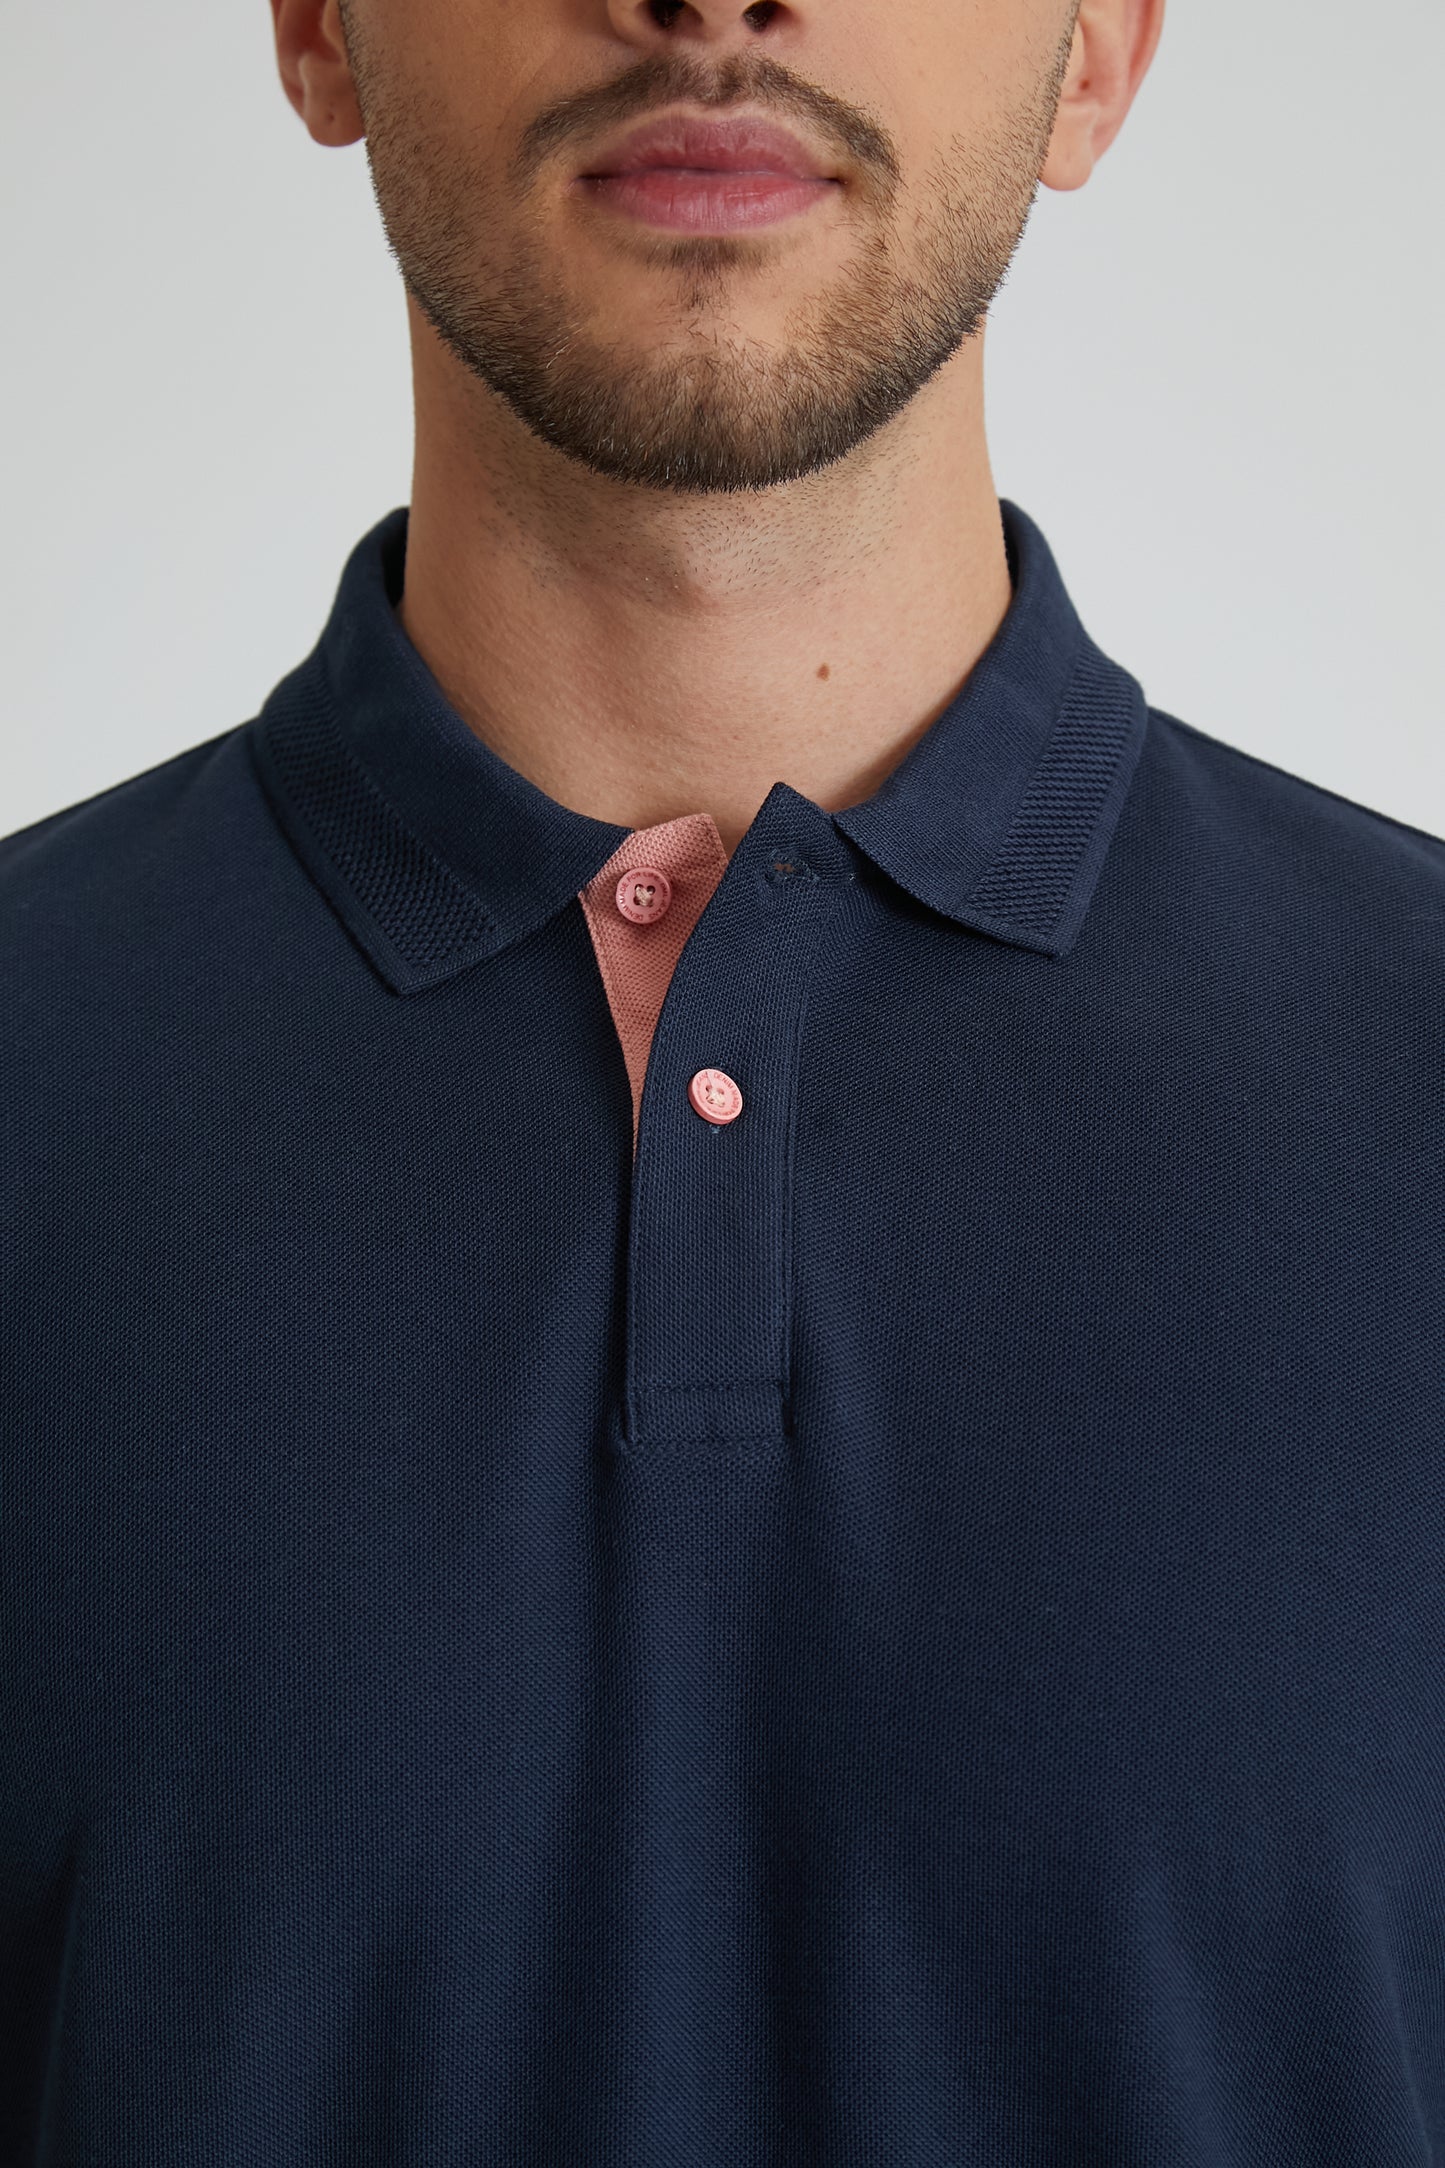 KUGA honeycomb pique polo in NAVY - DML Jeans 